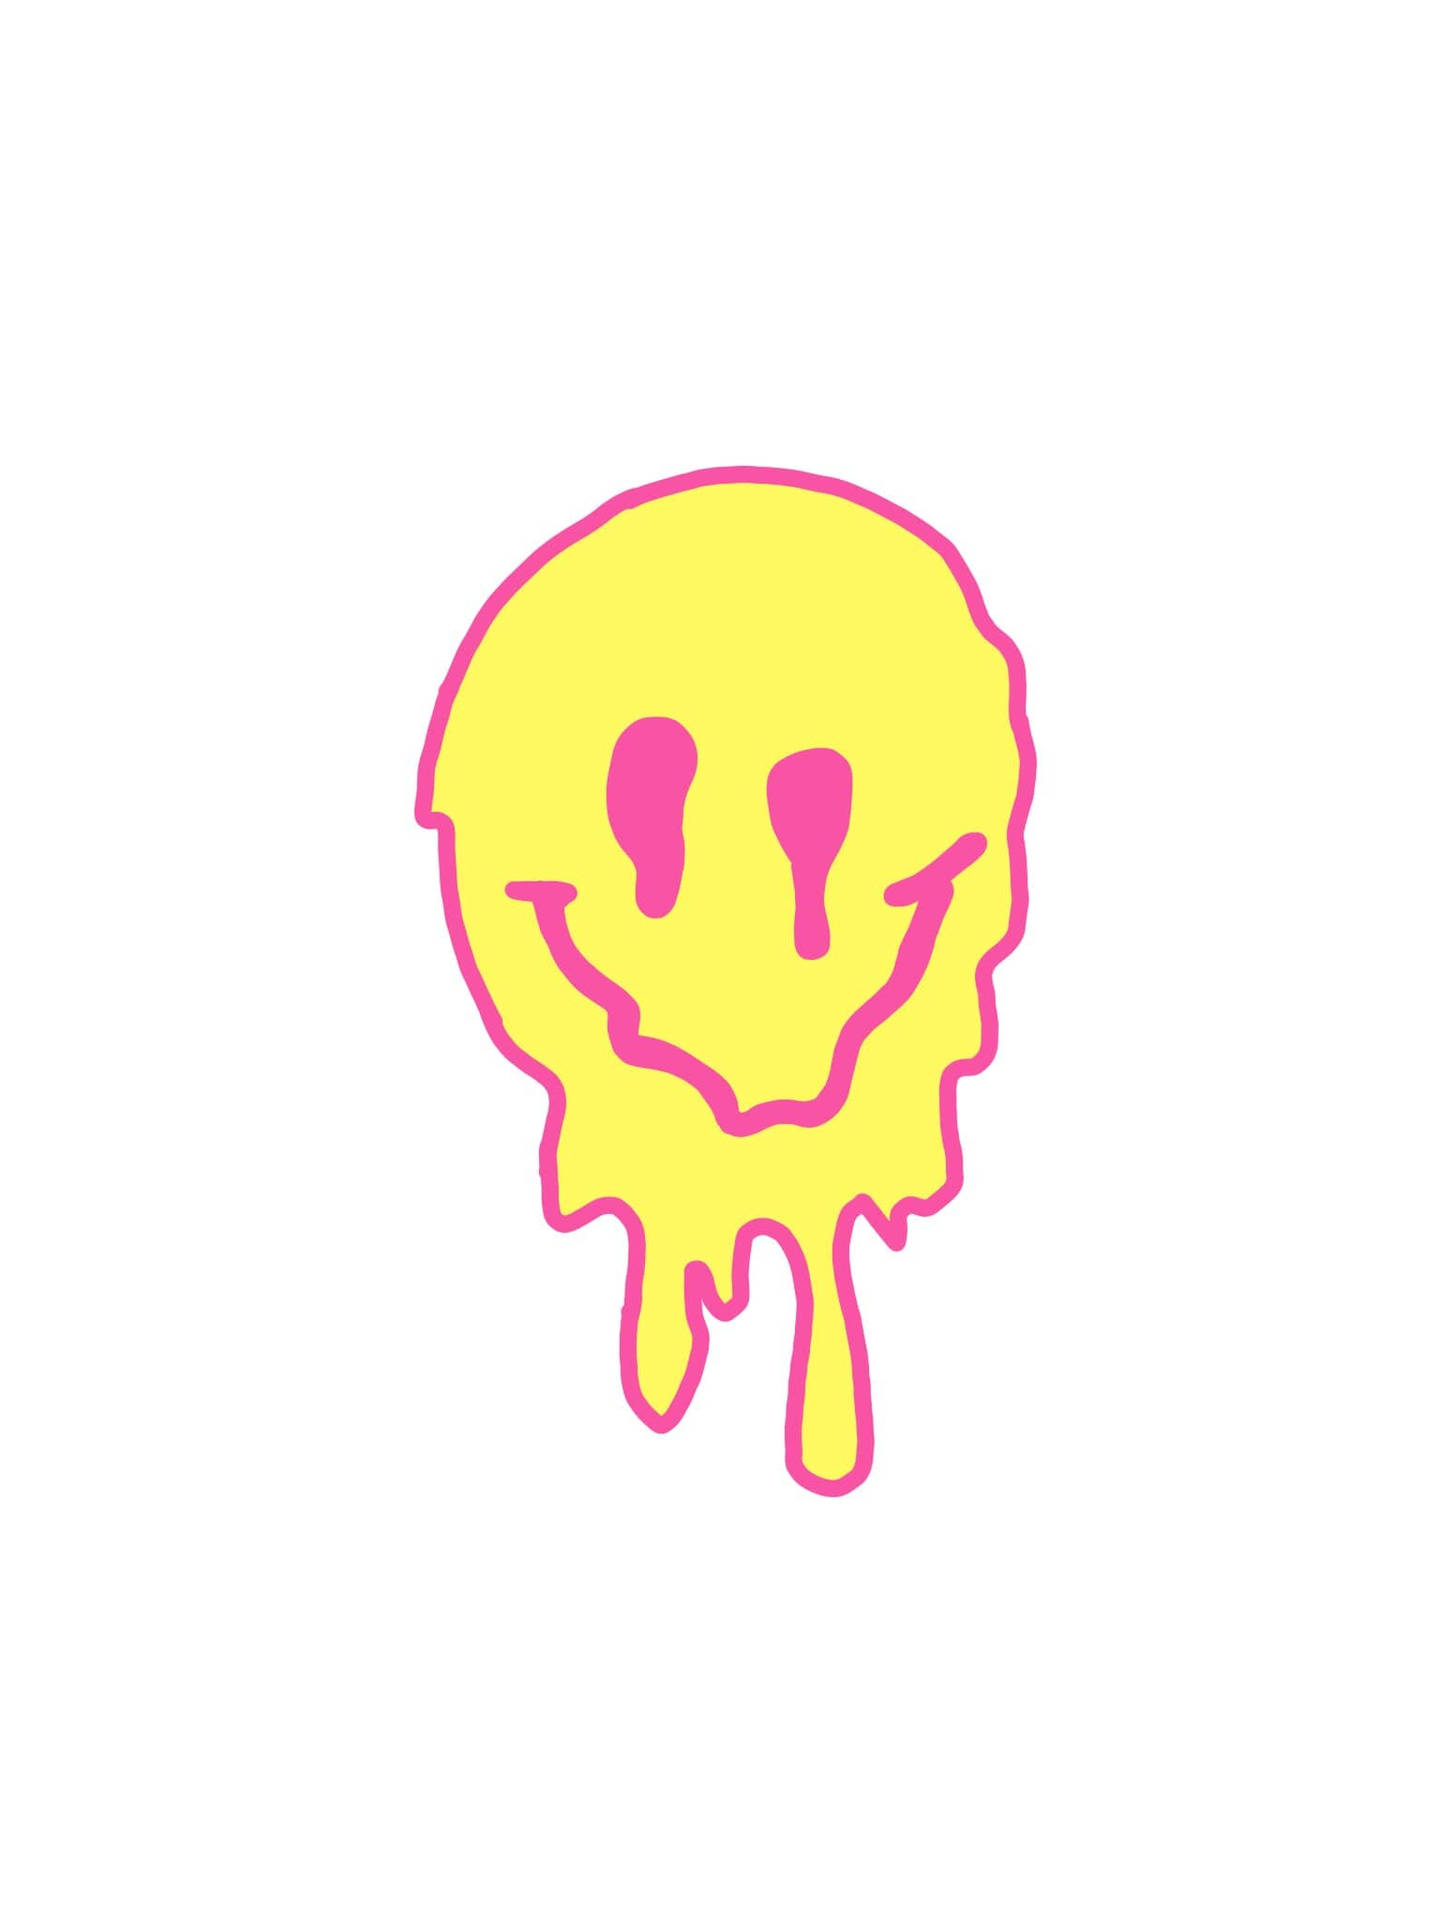 Preppy Smiley Face Dripping Yellow Background